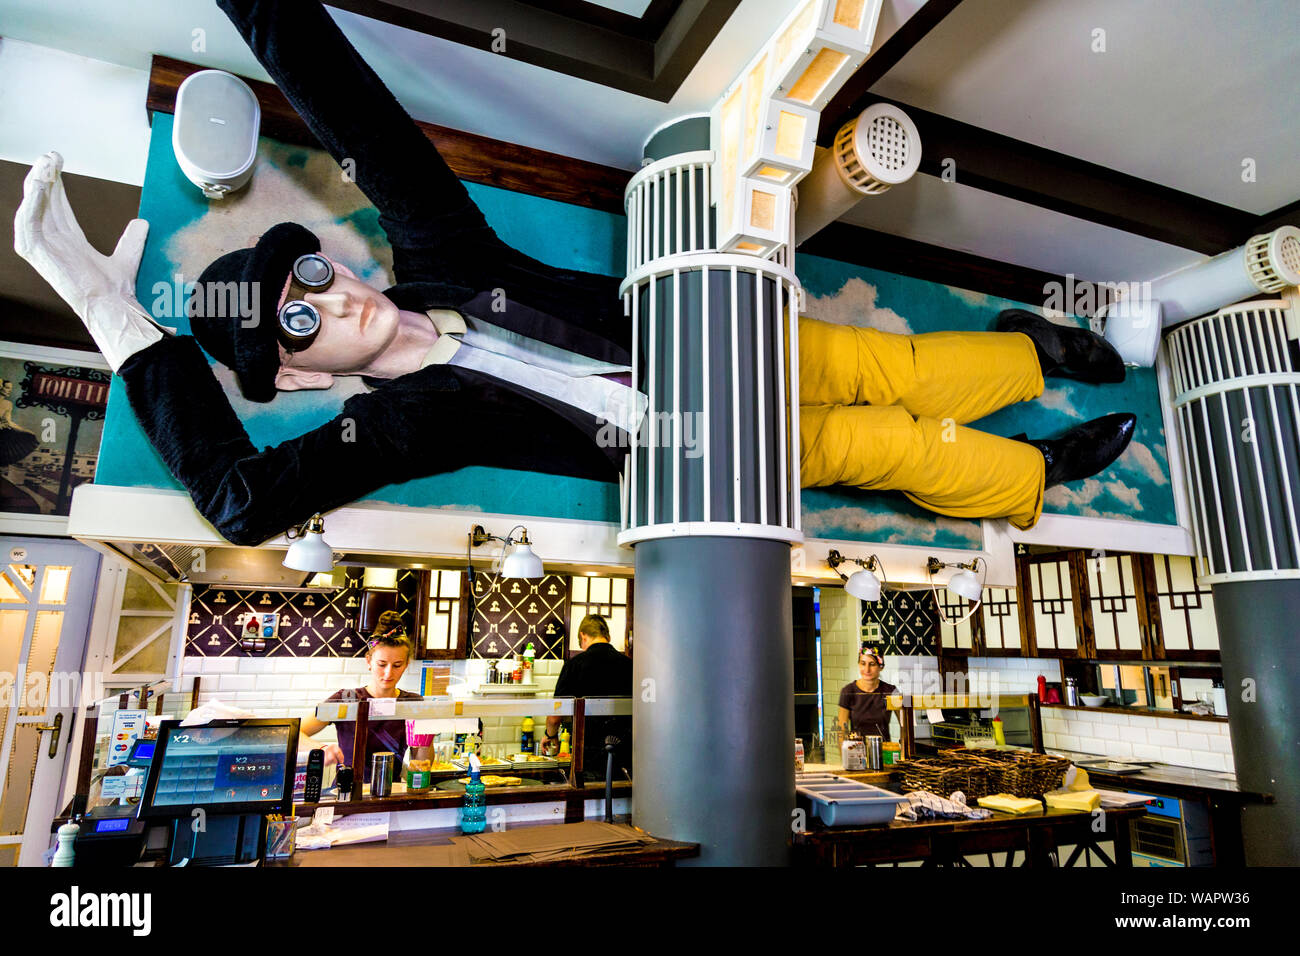 Giant mannequin with bowler hat and glasses above the kitchen of trendy pancake restaurant Manekin in Warsaw, Poland Stock Photo